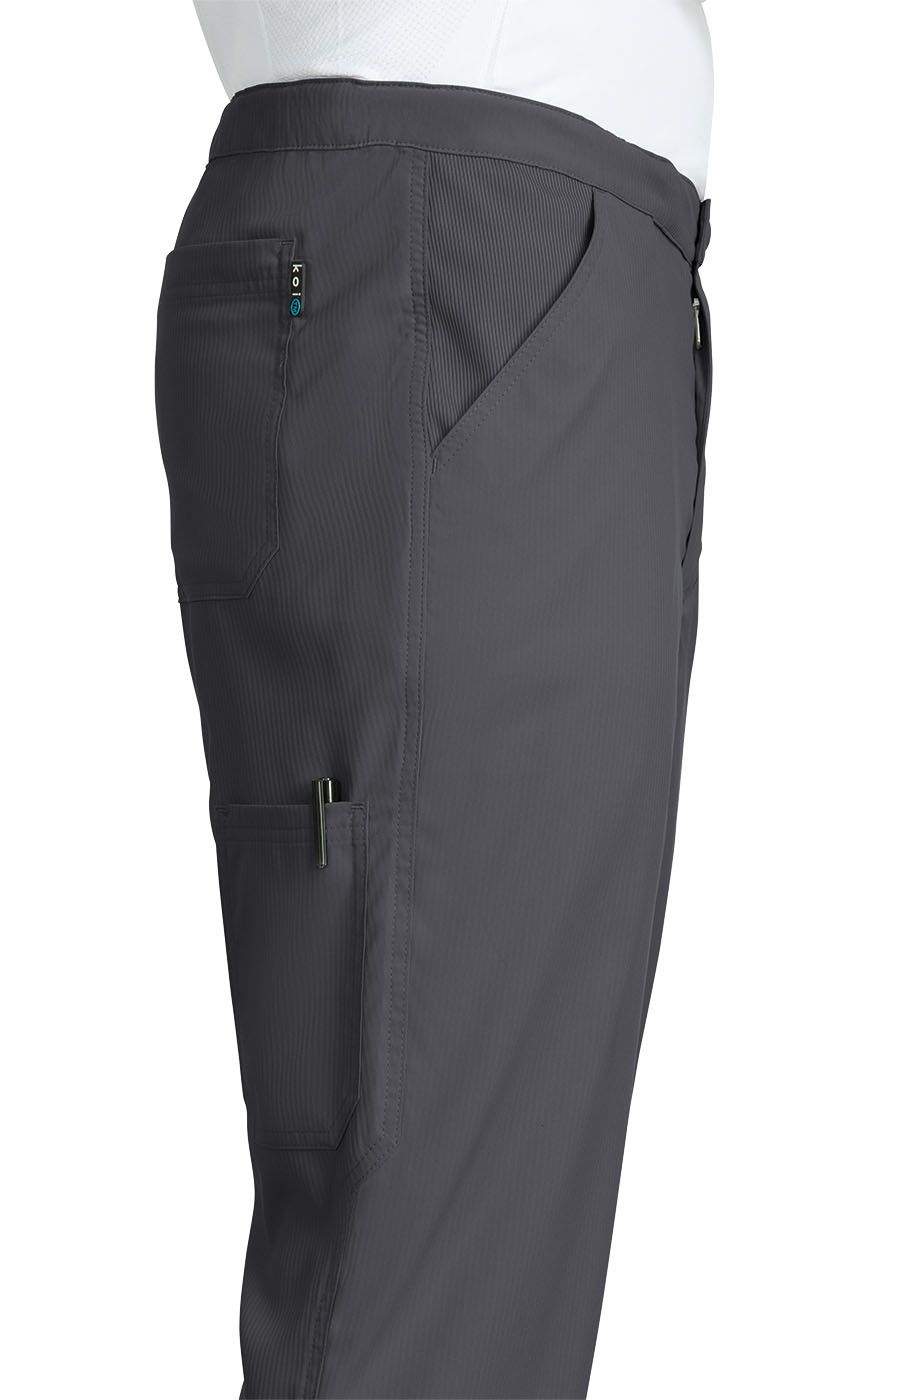 discovery-pant-charcoal